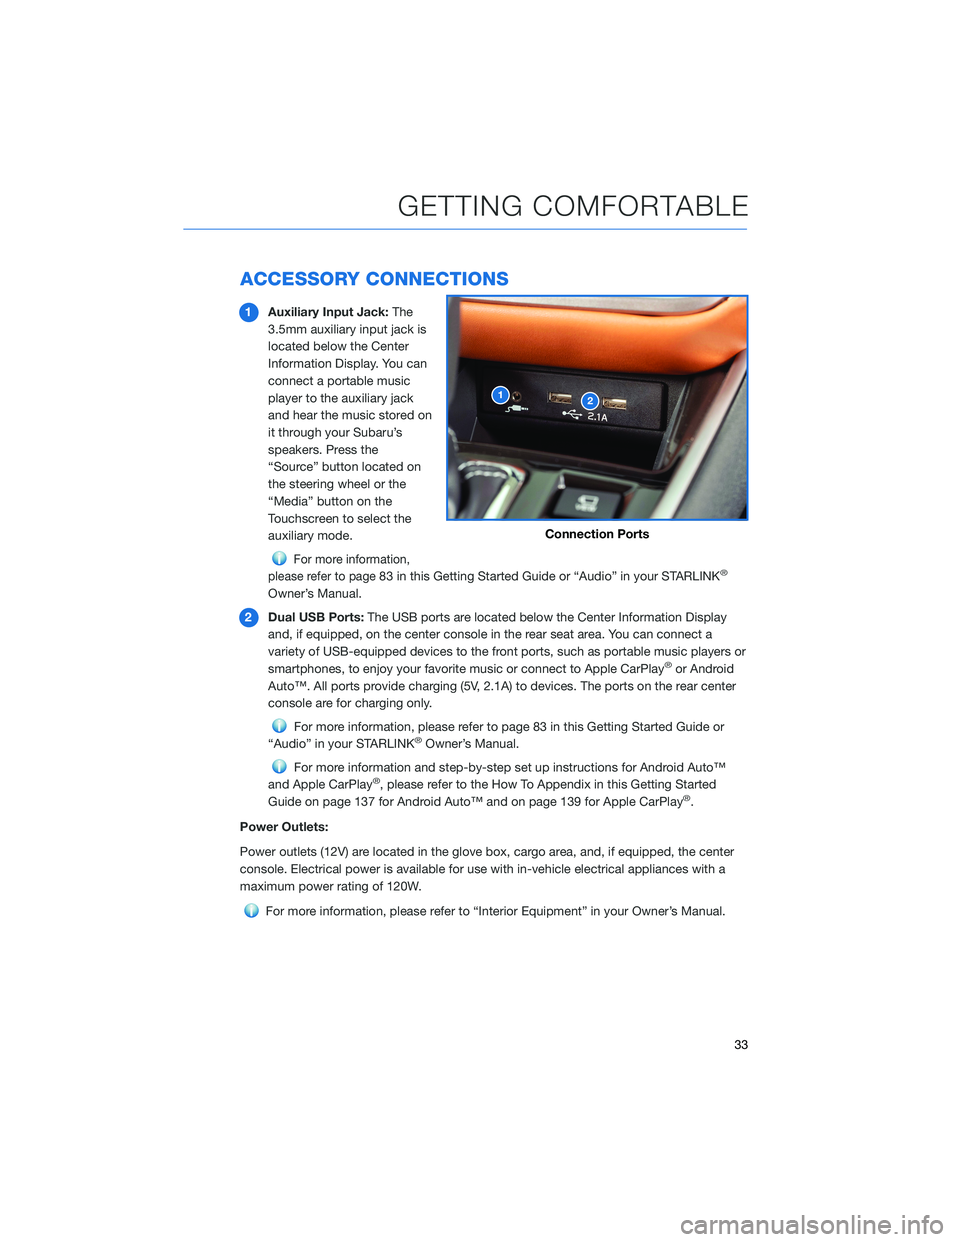 SUBARU OUTBACK 2022  Getting Started Guide ACCESSORY CONNECTIONS
1Auxiliary Input Jack:The
3.5mm auxiliary input jack is
located below the Center
Information Display. You can
connect a portable music
player to the auxiliary jack
and hear the m